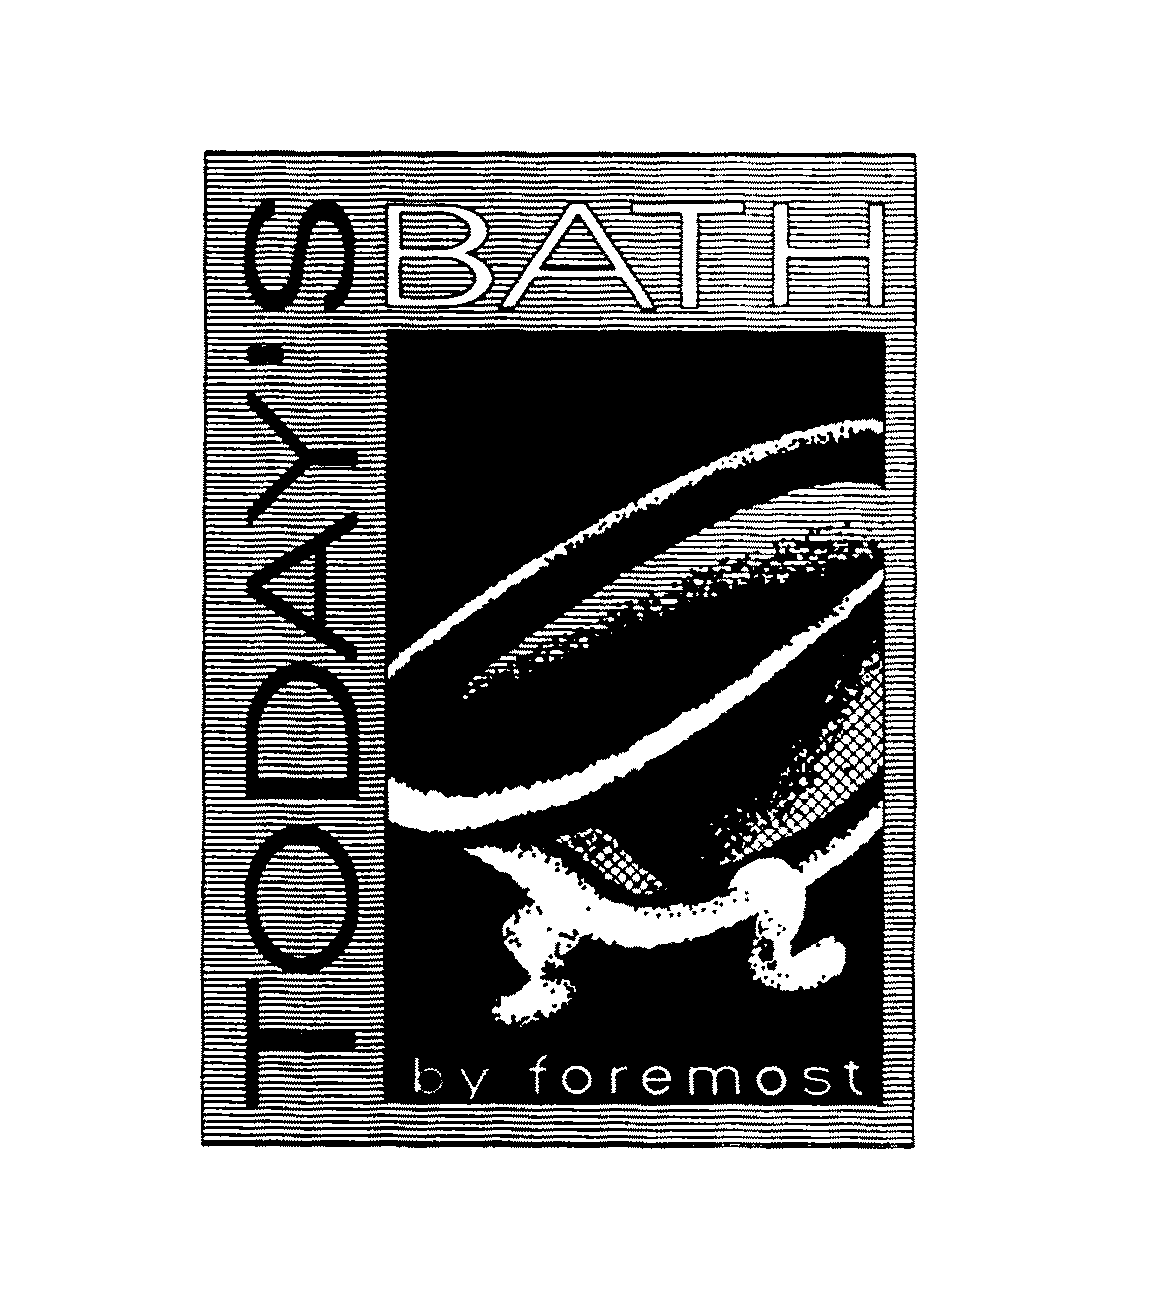 TODAY'S BATH BY FOREMOST